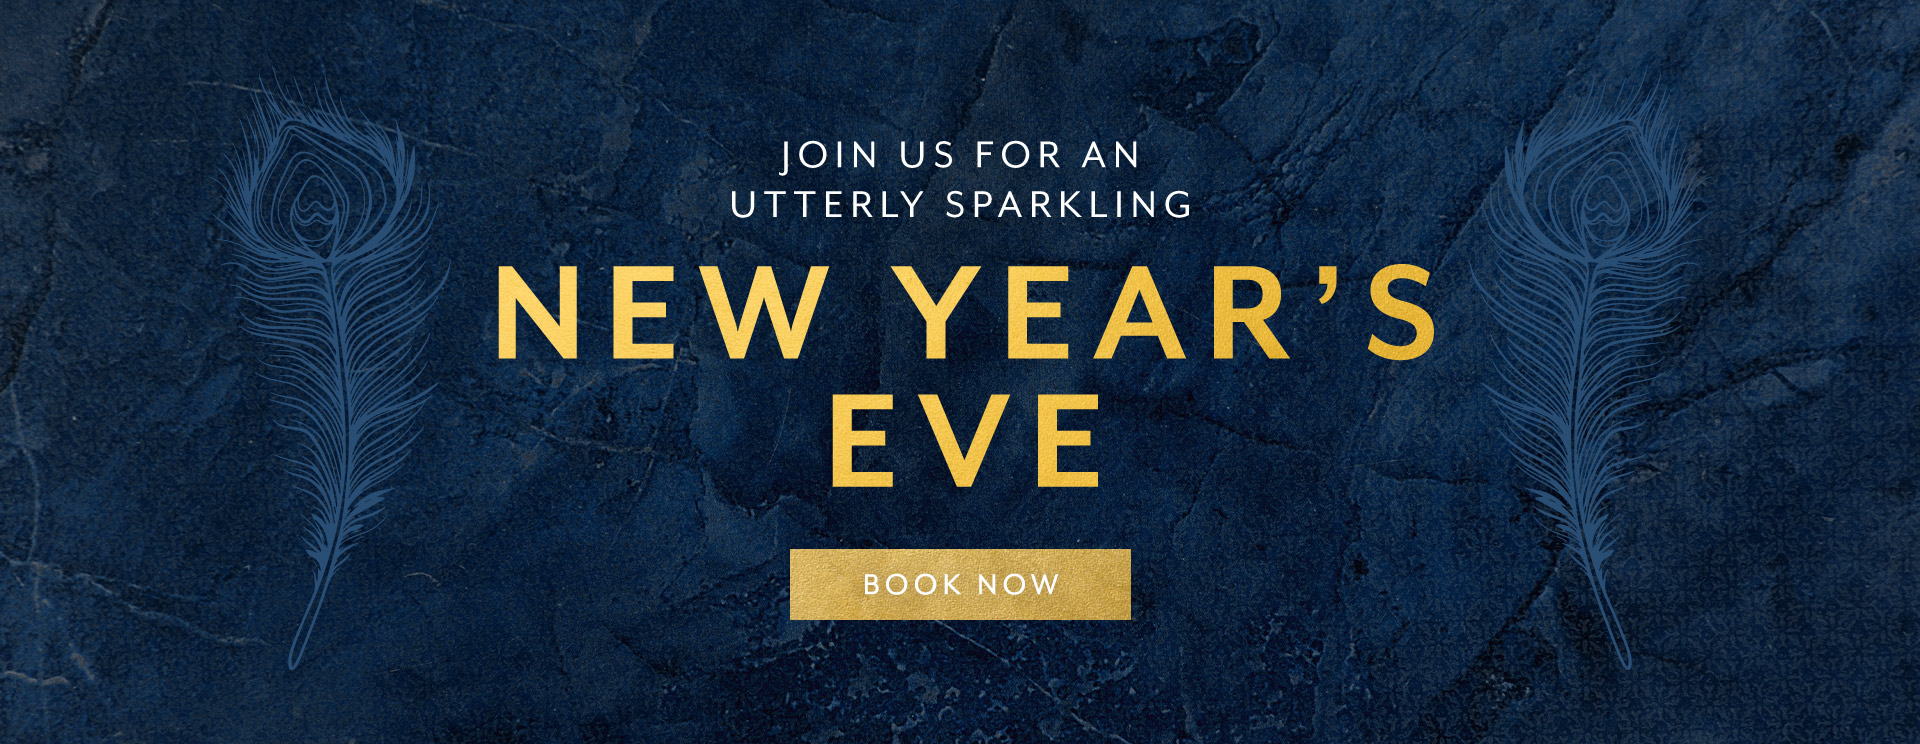 New Year's Eve at The Midland